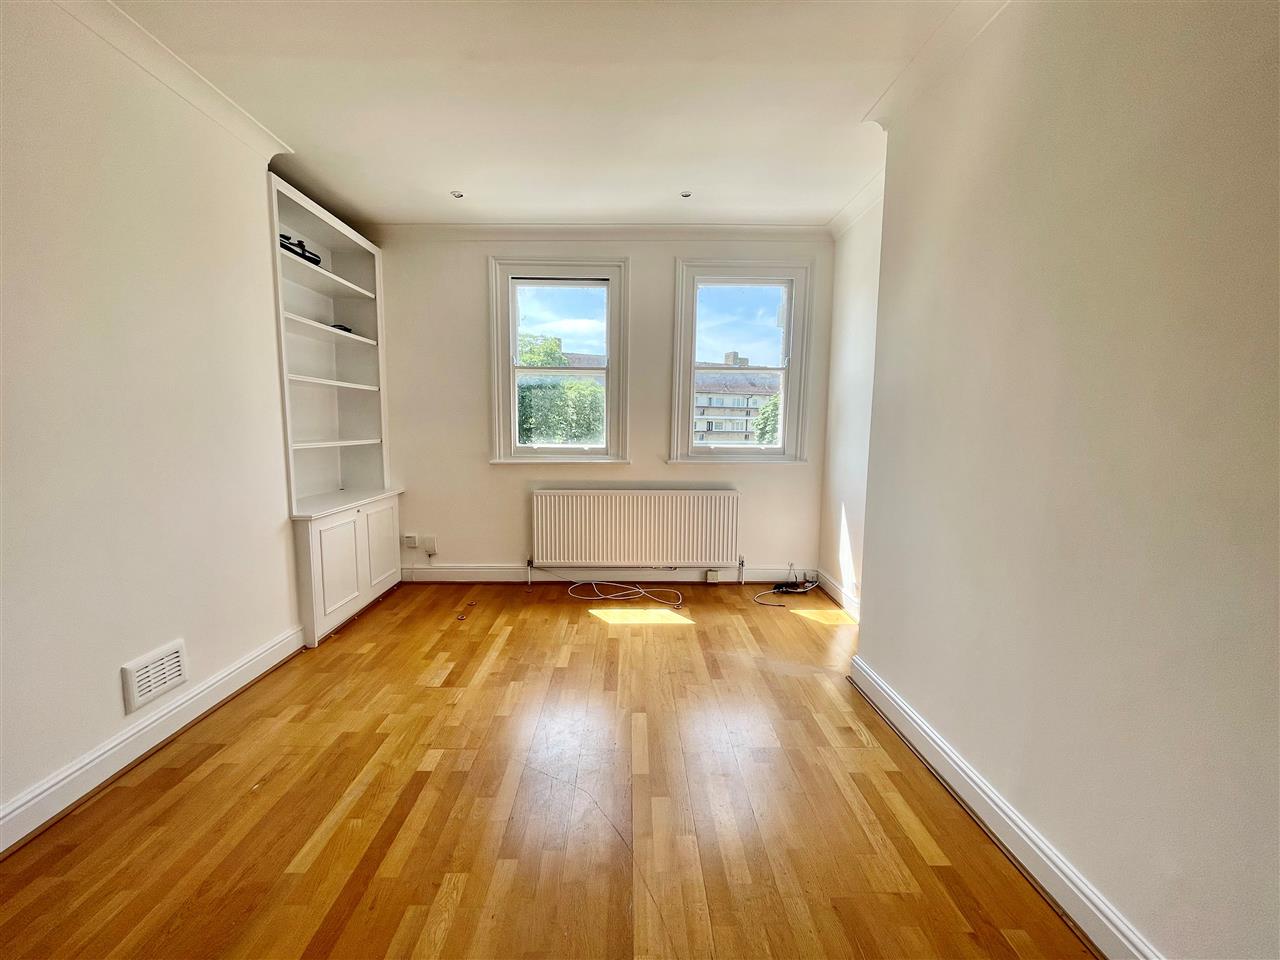 AVAILABLE IMMEDIATELY! NEWLY DECORATED!<BR>Located on the airy and tree lined Tufnell Park Road is this well presented and contemporary second floor UNFURNISHED Victorian converted flat within walking distance of Tufnell Park underground station (Northern Line) and the local shopping, ...